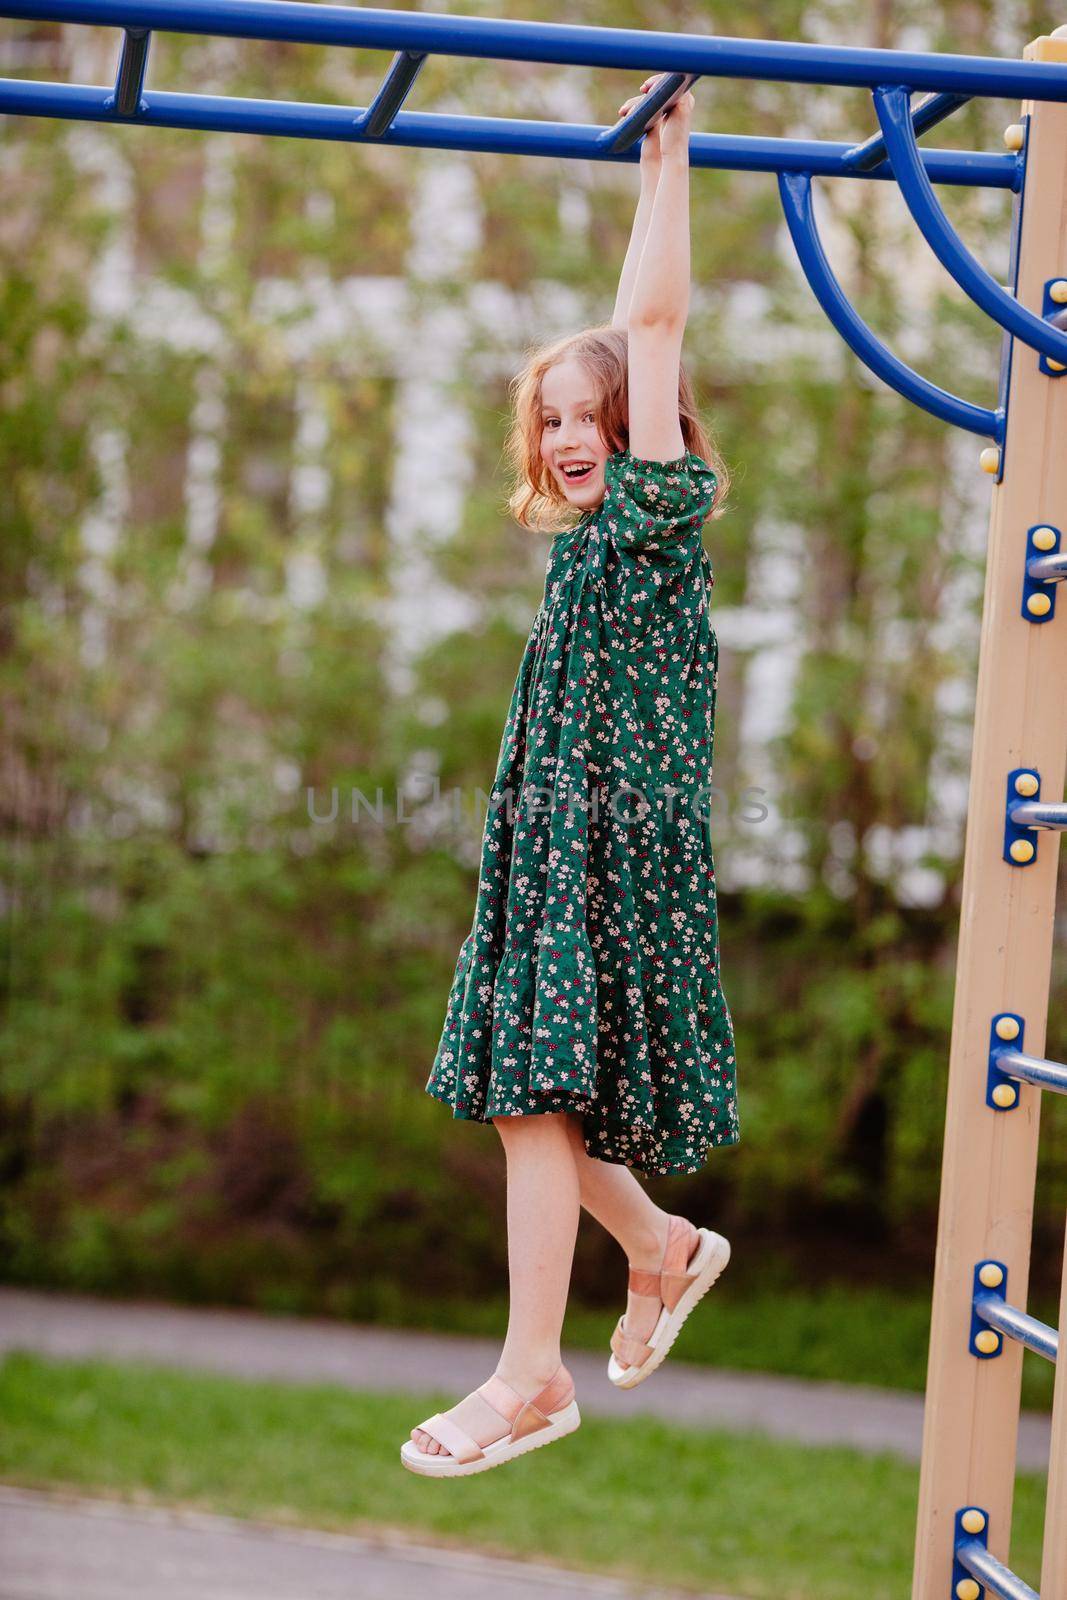 Smiling child hanging on monkey bars outdoors by Demkat